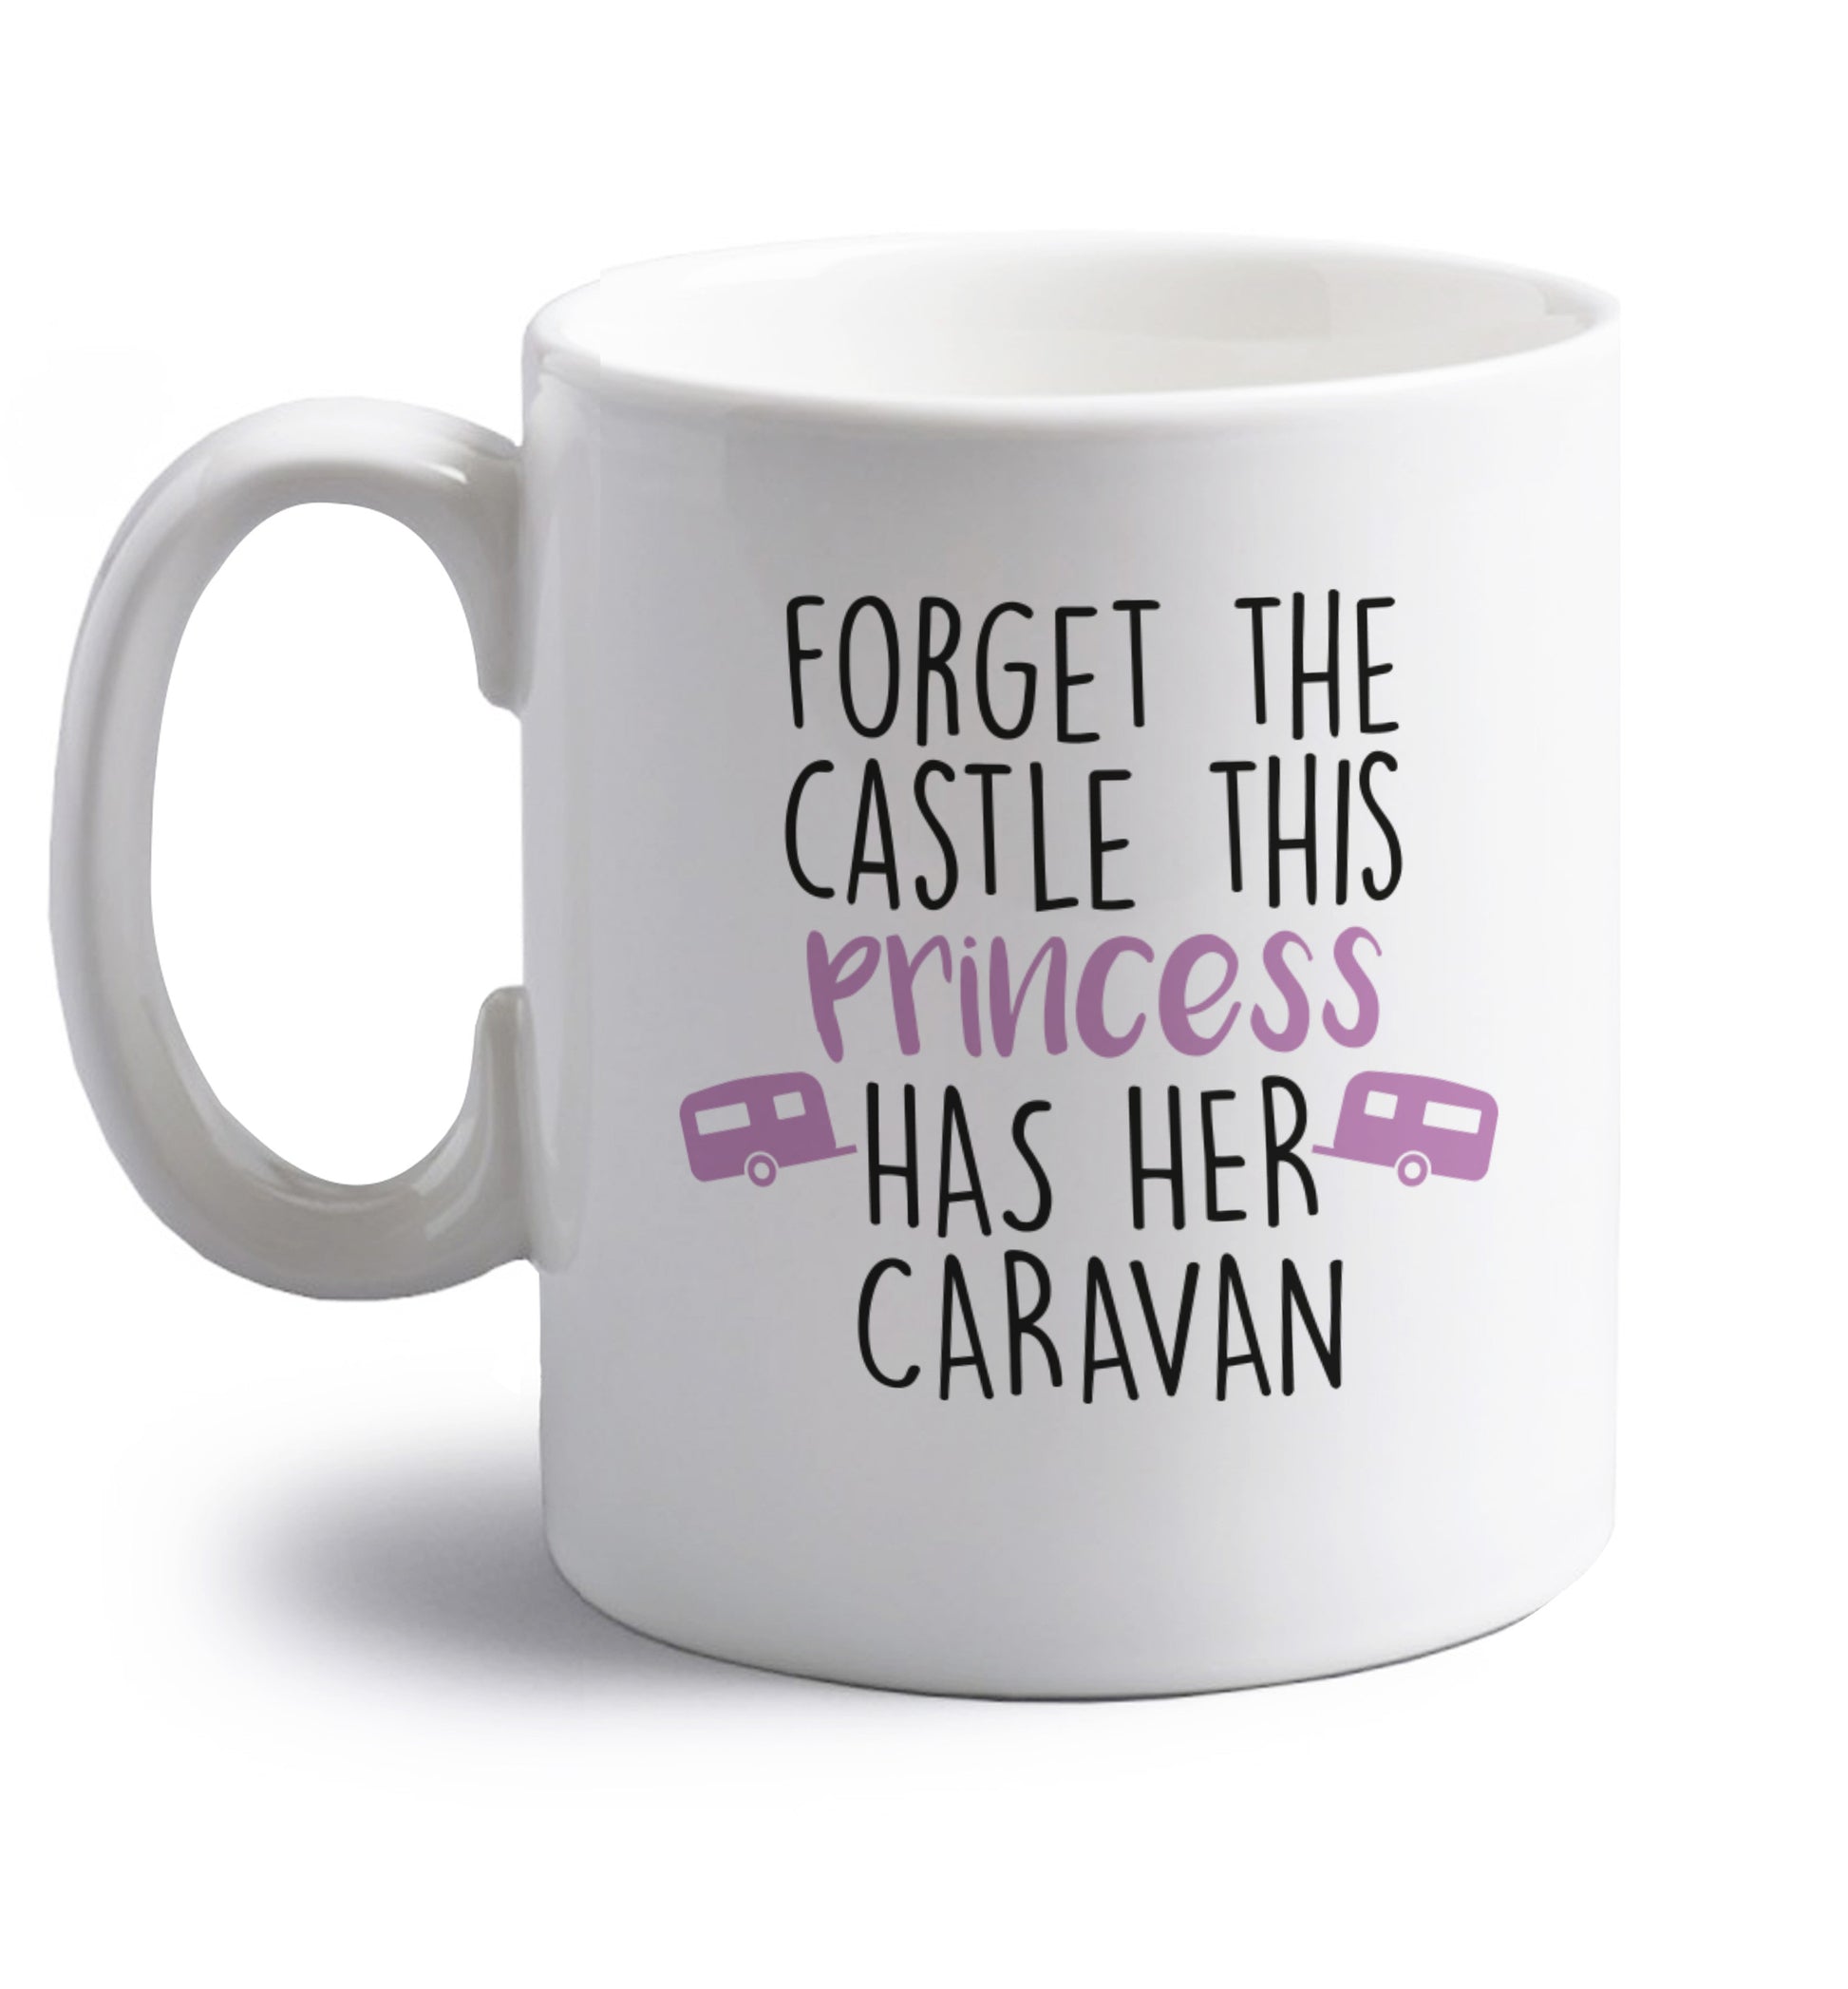 Forget the castle this princess lives at the caravan right handed white ceramic mug 